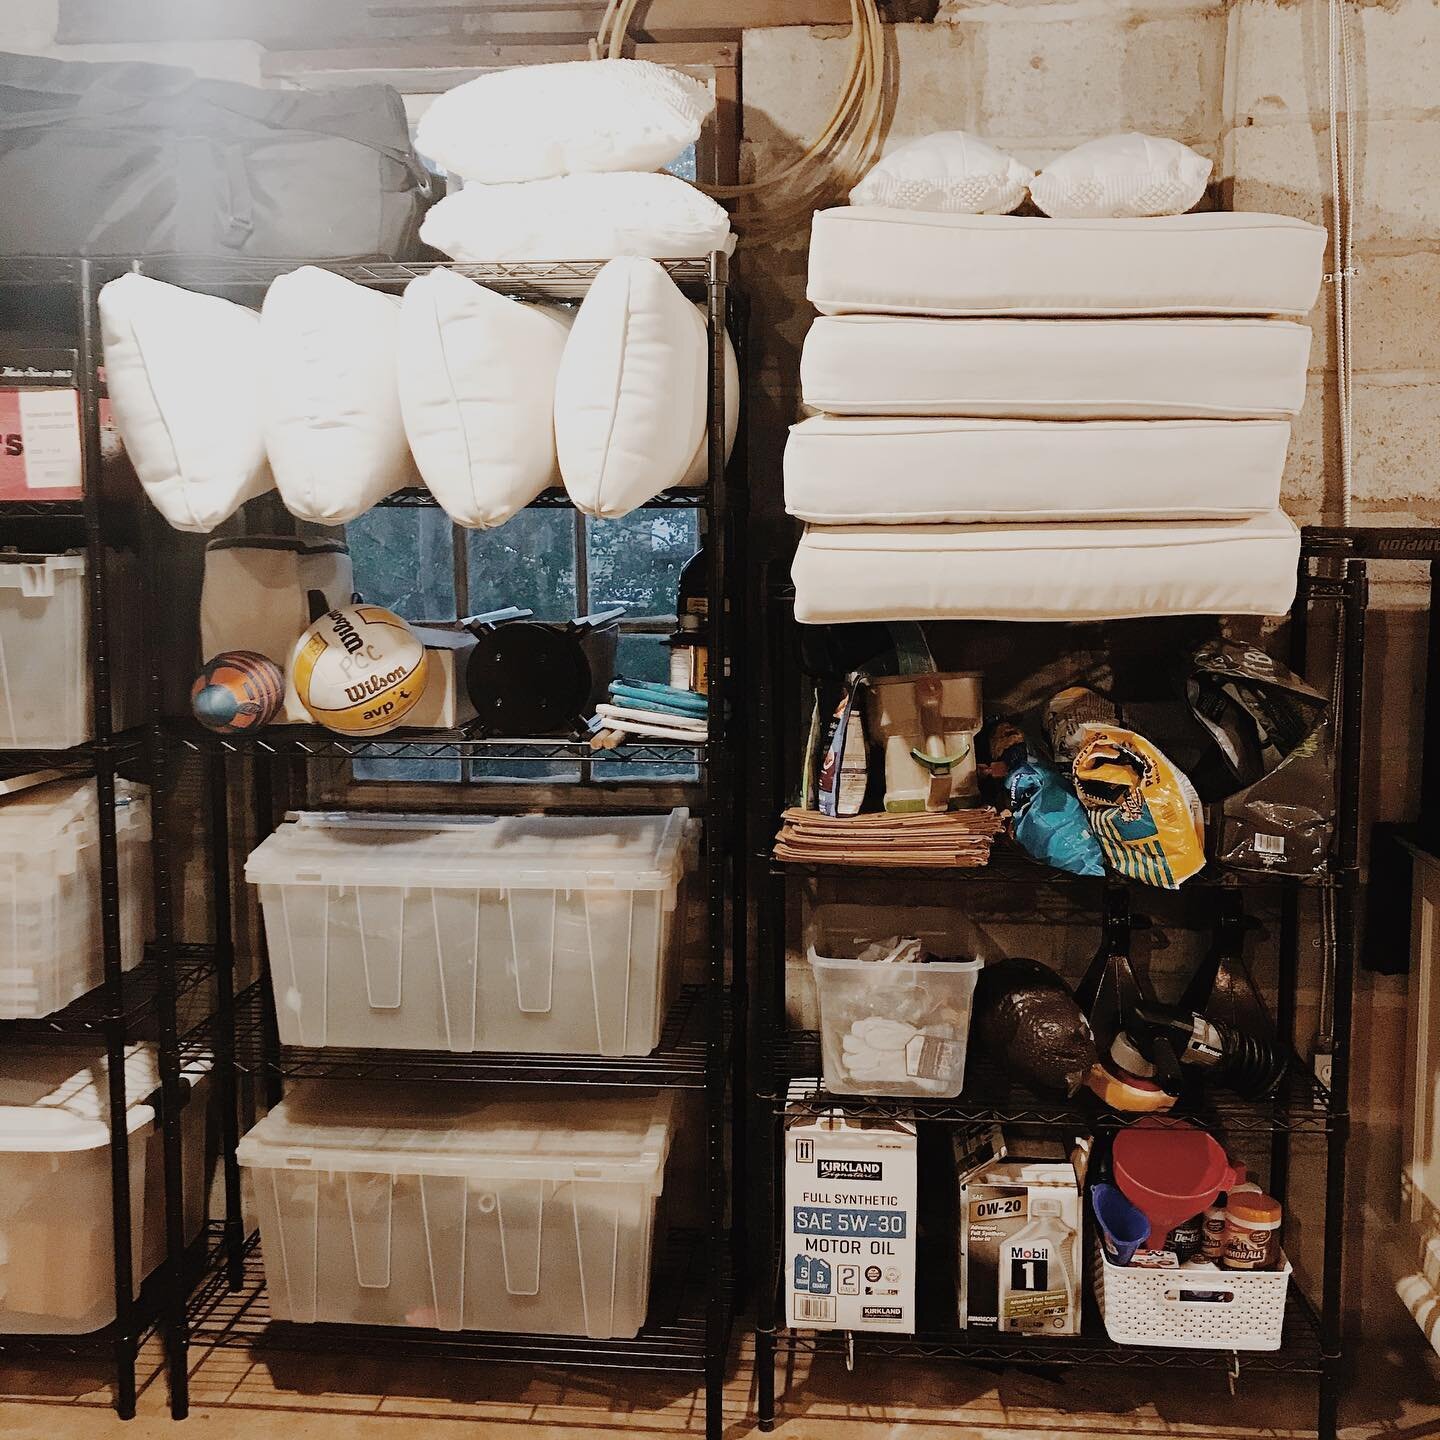 GARAGE MAKEOVER ✨ 
.
.
.
Our garage got a small face lift. We purged of all unnecessary items, and created a home for the things we kept. Small, but mighty! 

#homeorganization #organize #organizedlife #smallbusiness #tidyingup